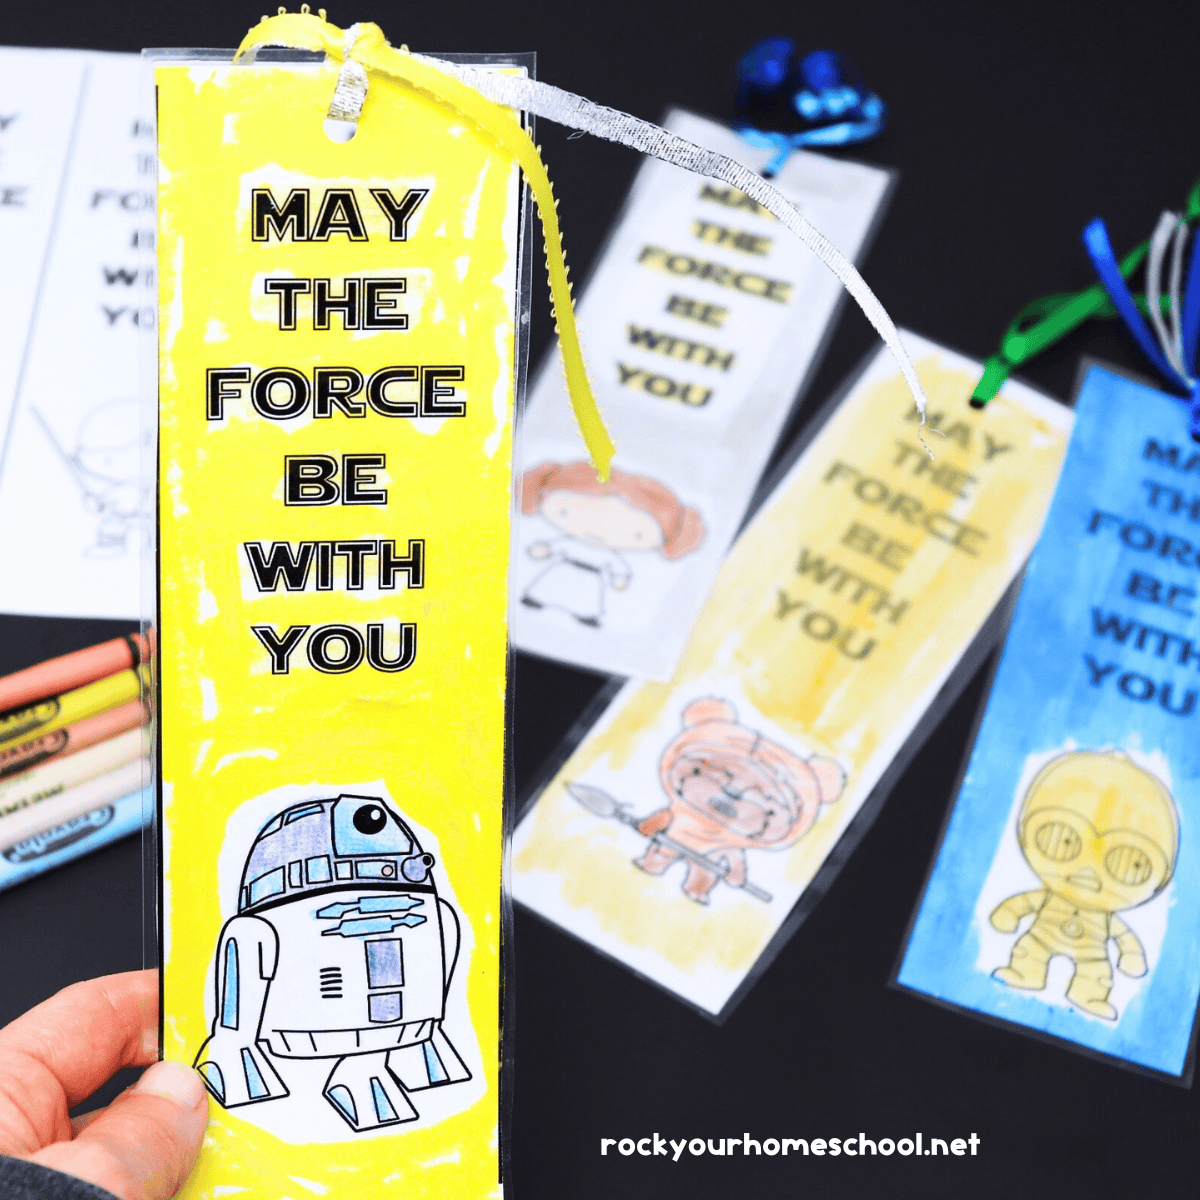 Woman holding examples of Star Wars coloring bookmarks saying May The Force Be With You featuring R2-D2 with other bookmarks in the background.